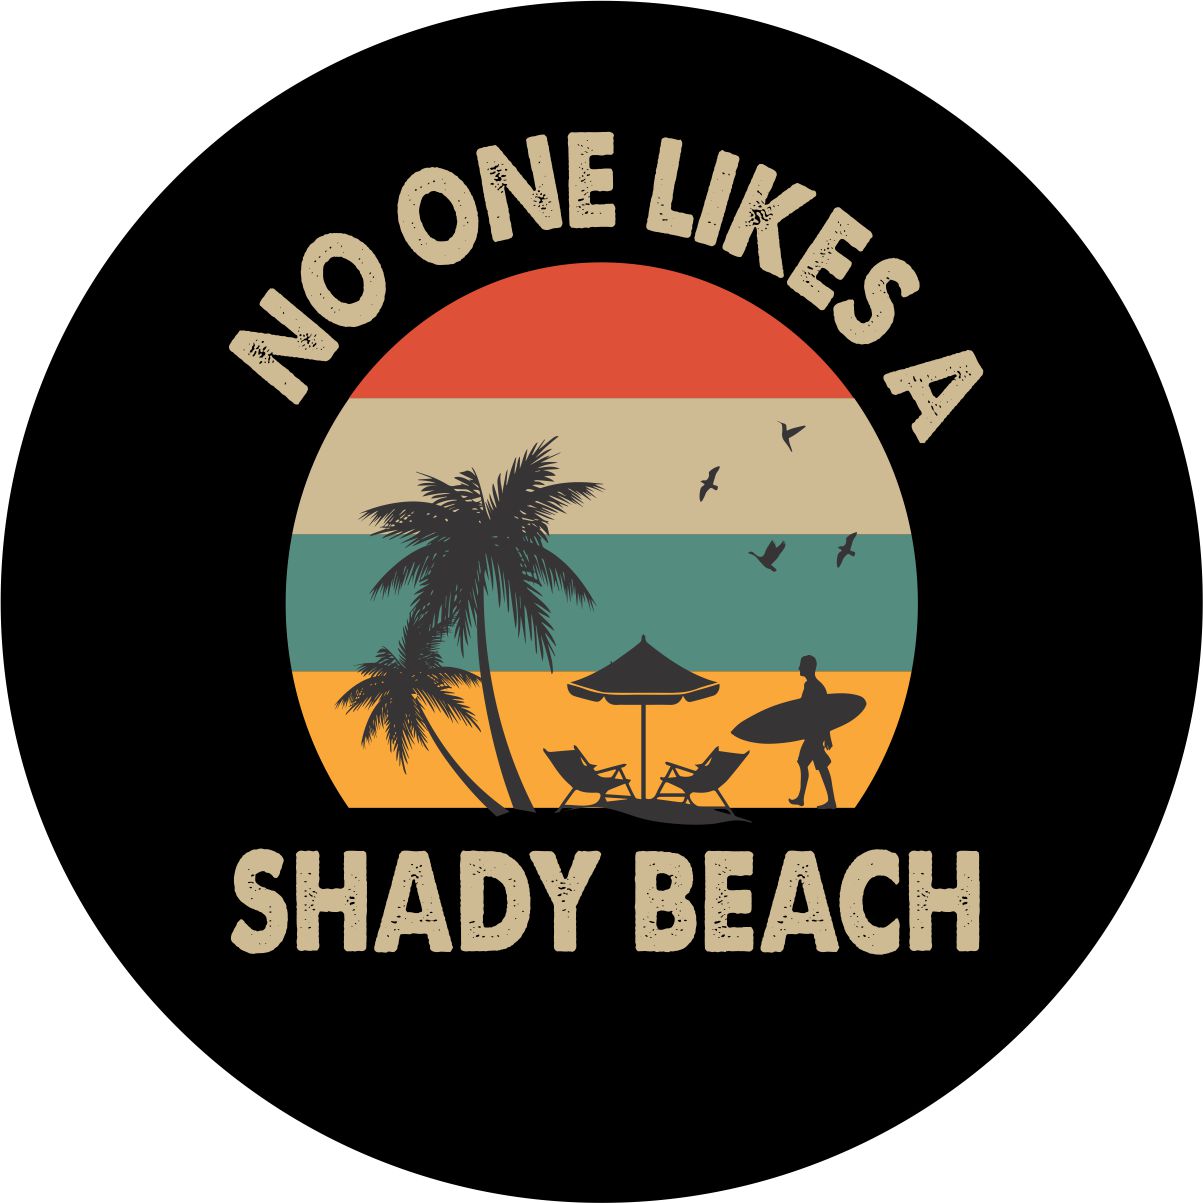 Mock up of a black vinyl spare tire cover with the image of a beach silhouette, surfer, beach chairs and palm trees. Colors of red, turquoise, and orange. The saying no one likes a shady beach